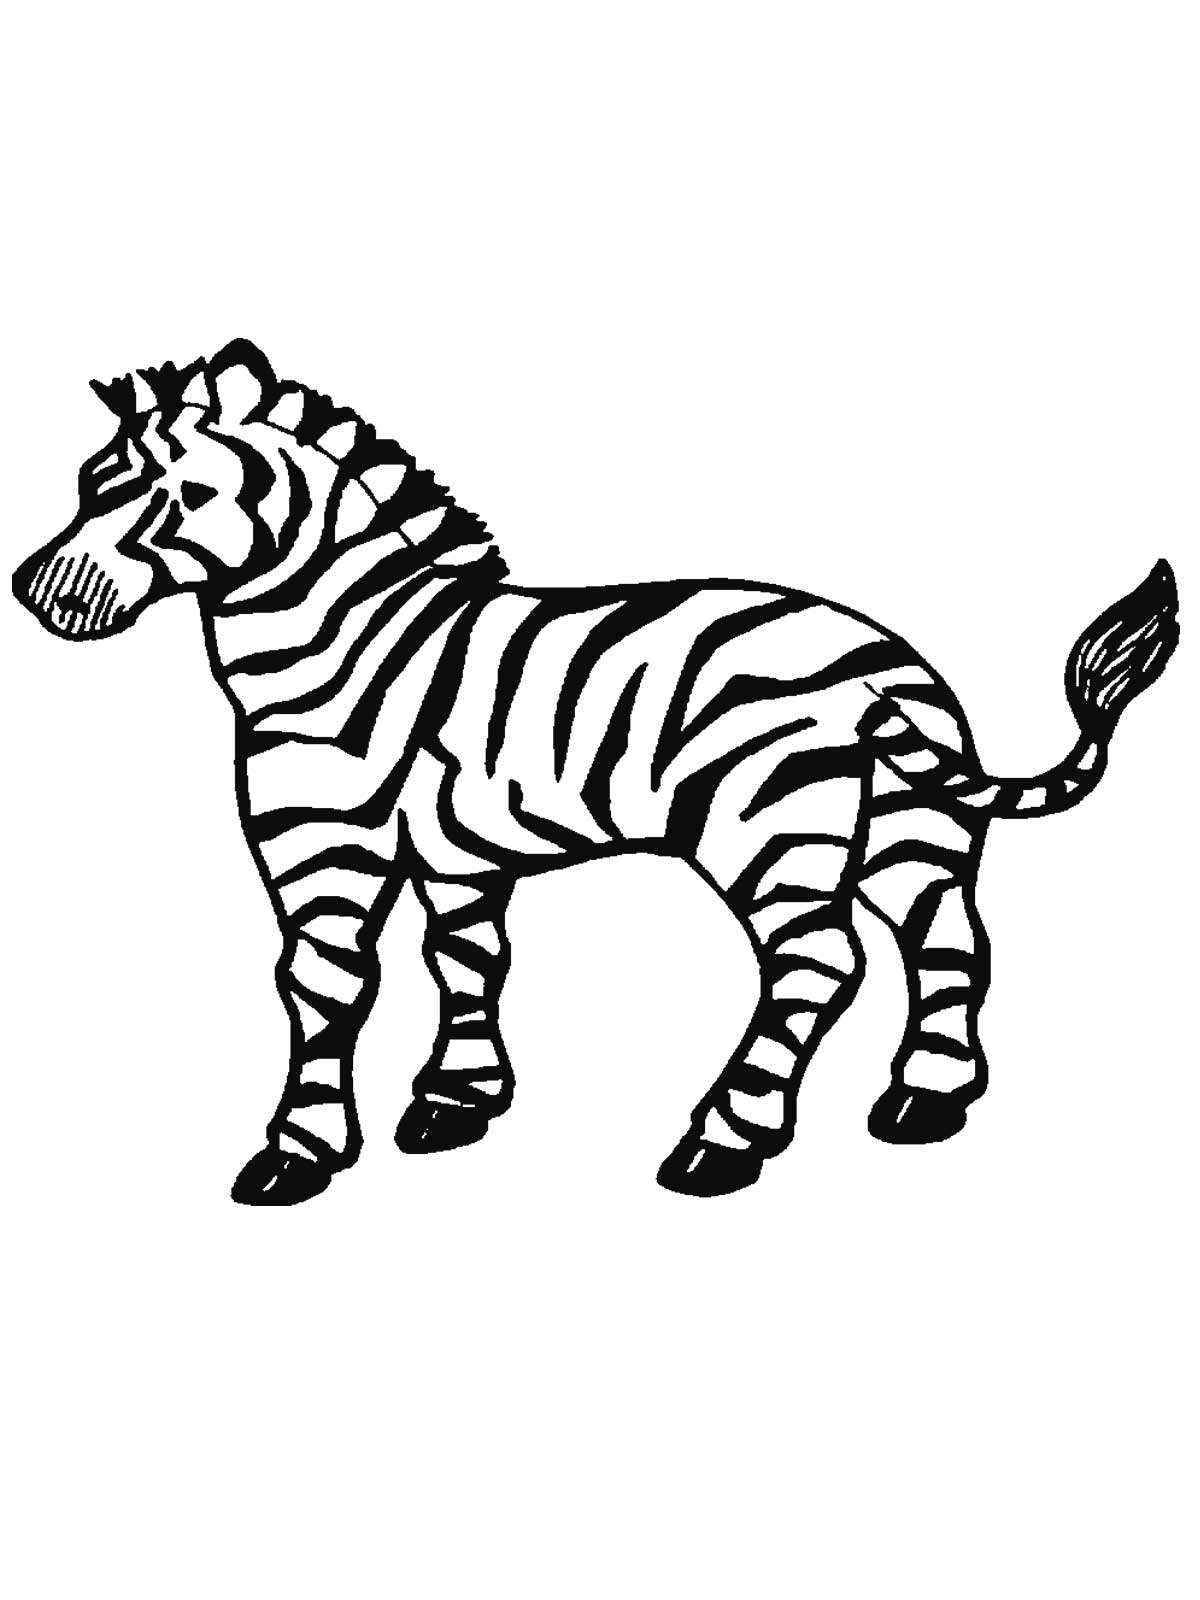 Zebra Coloring Pages To Print | Realistic Coloring Pages